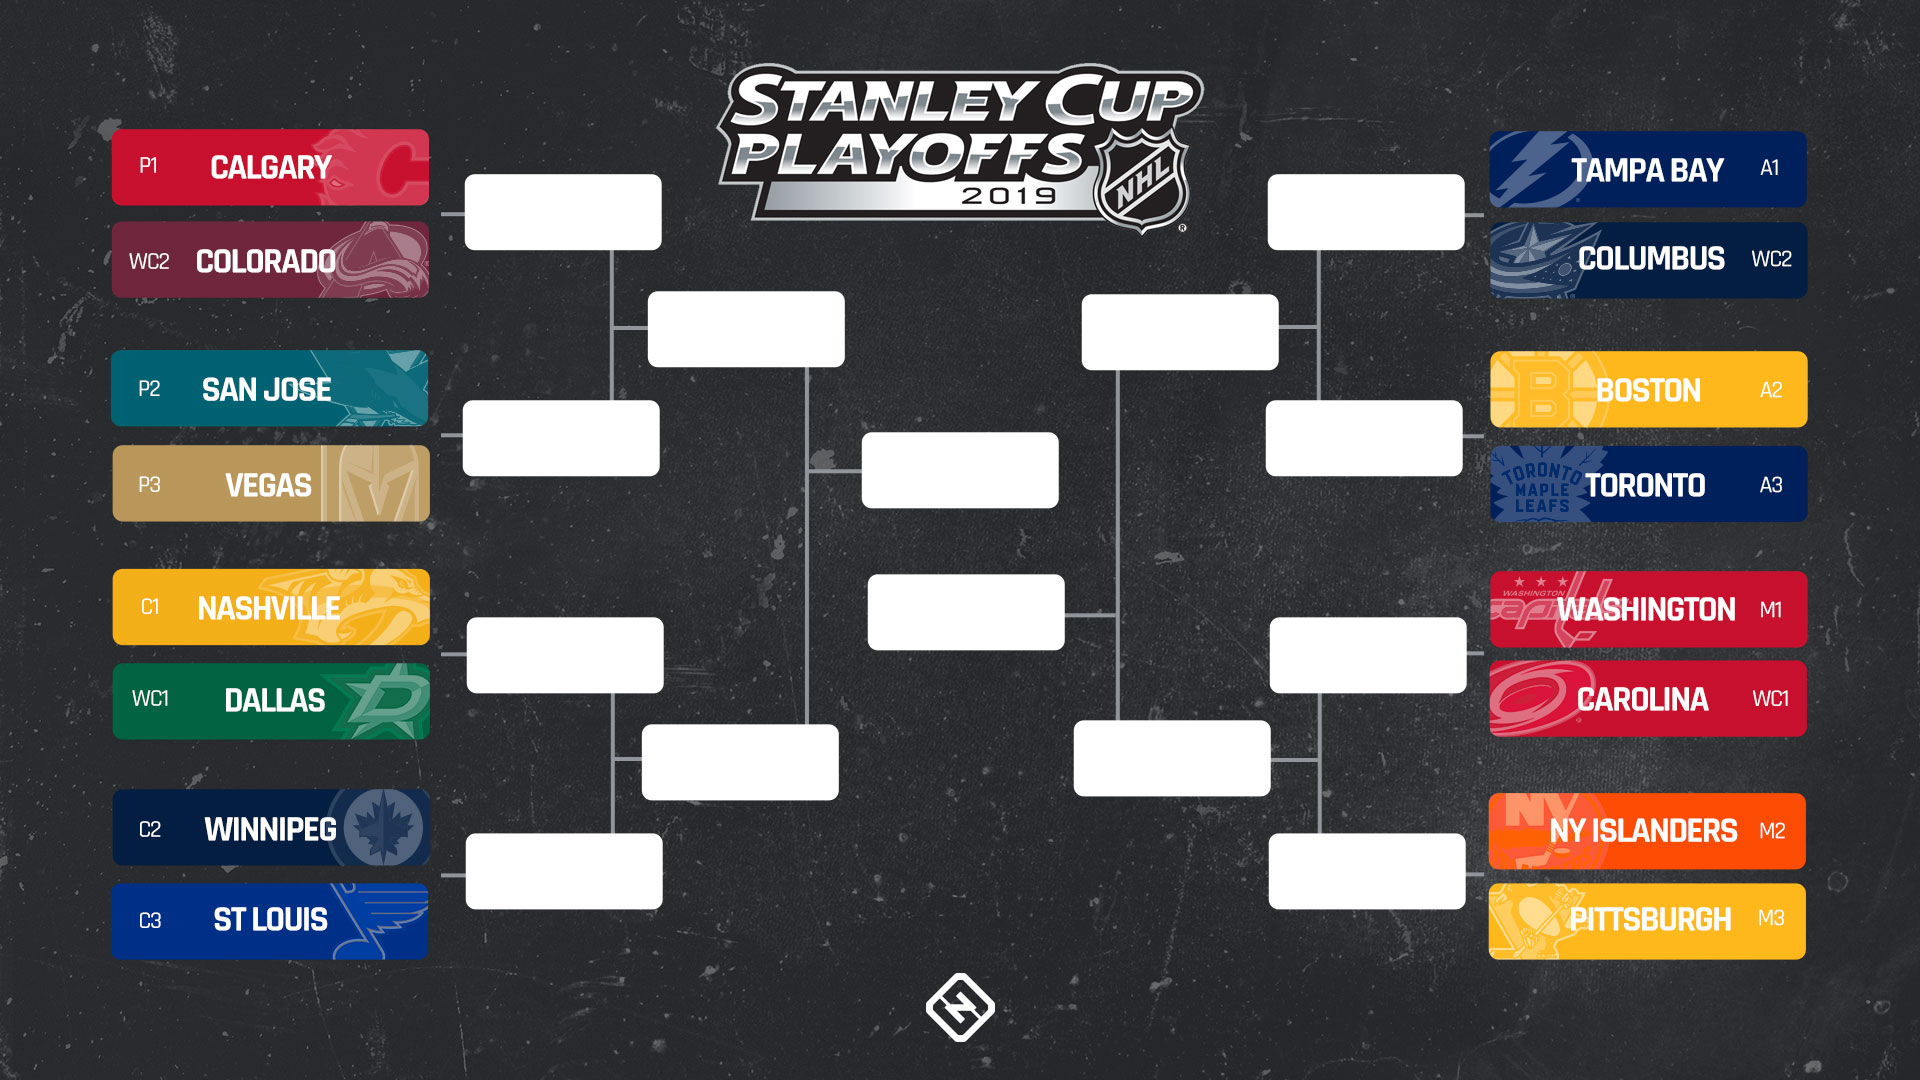 Stanley Cup predictions Sporting News experts make their 2019 playoff